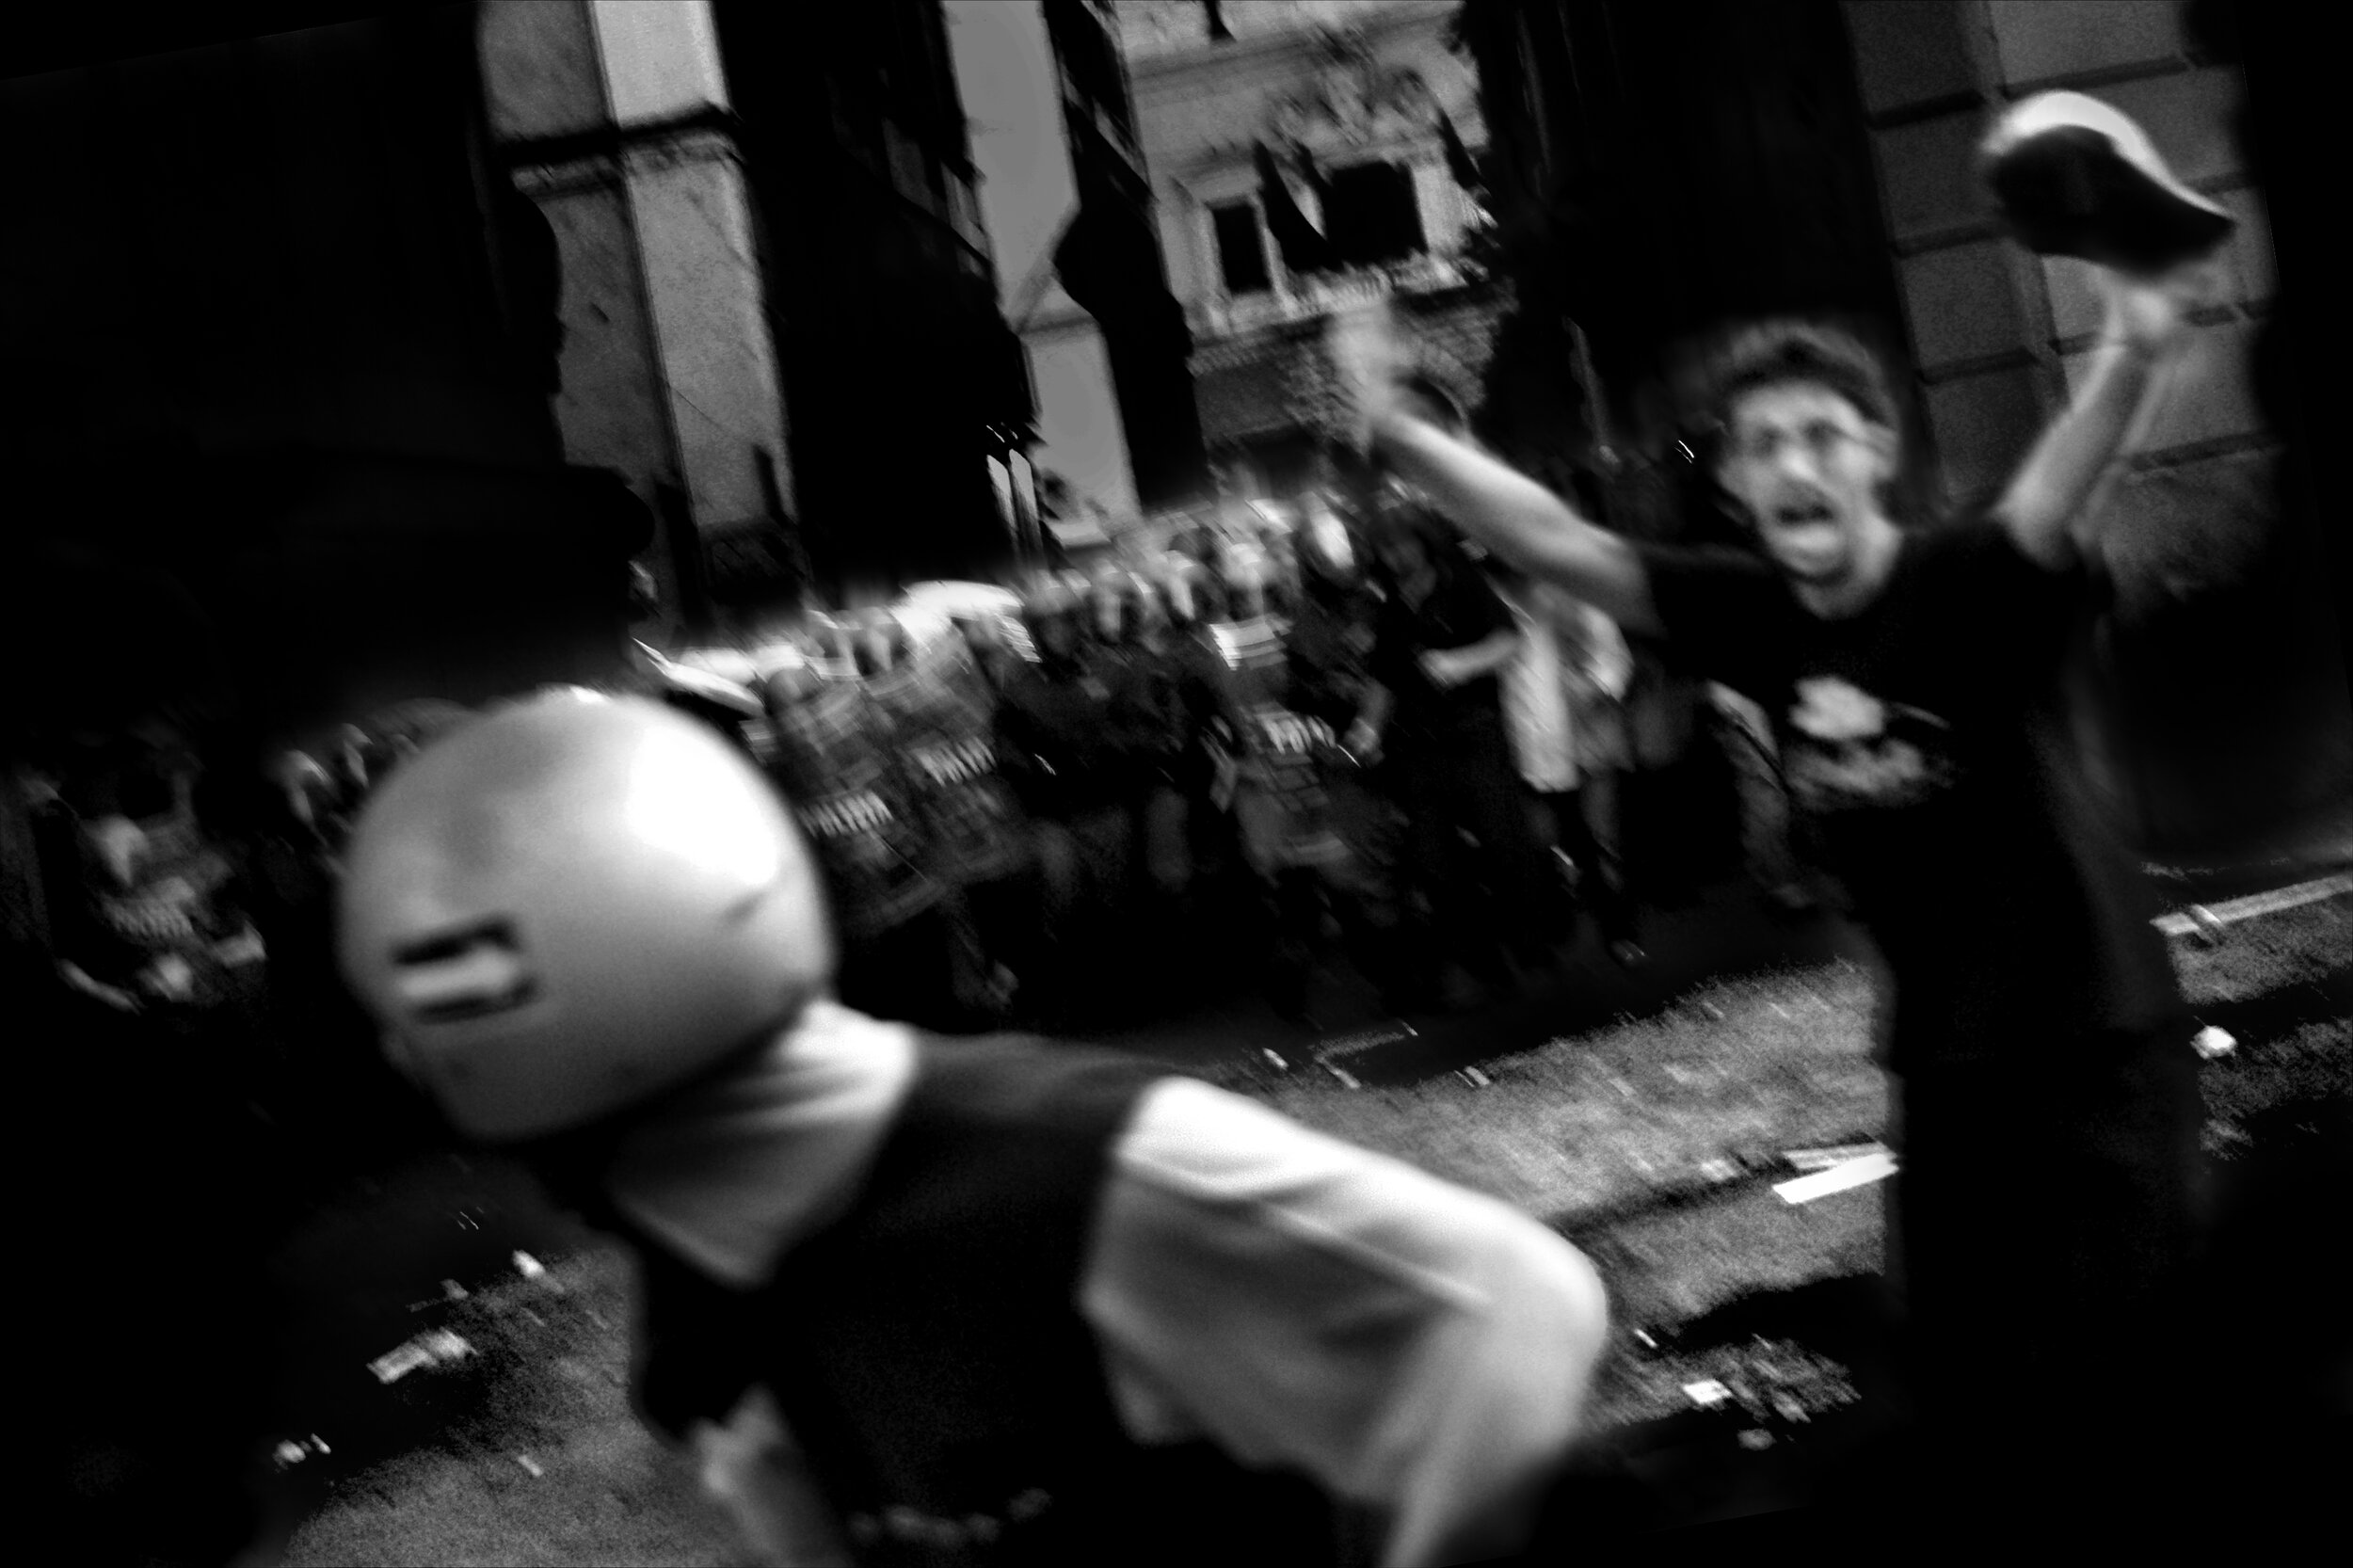  Rome, Italy  Police charge towards protestors.   heavy post-production  